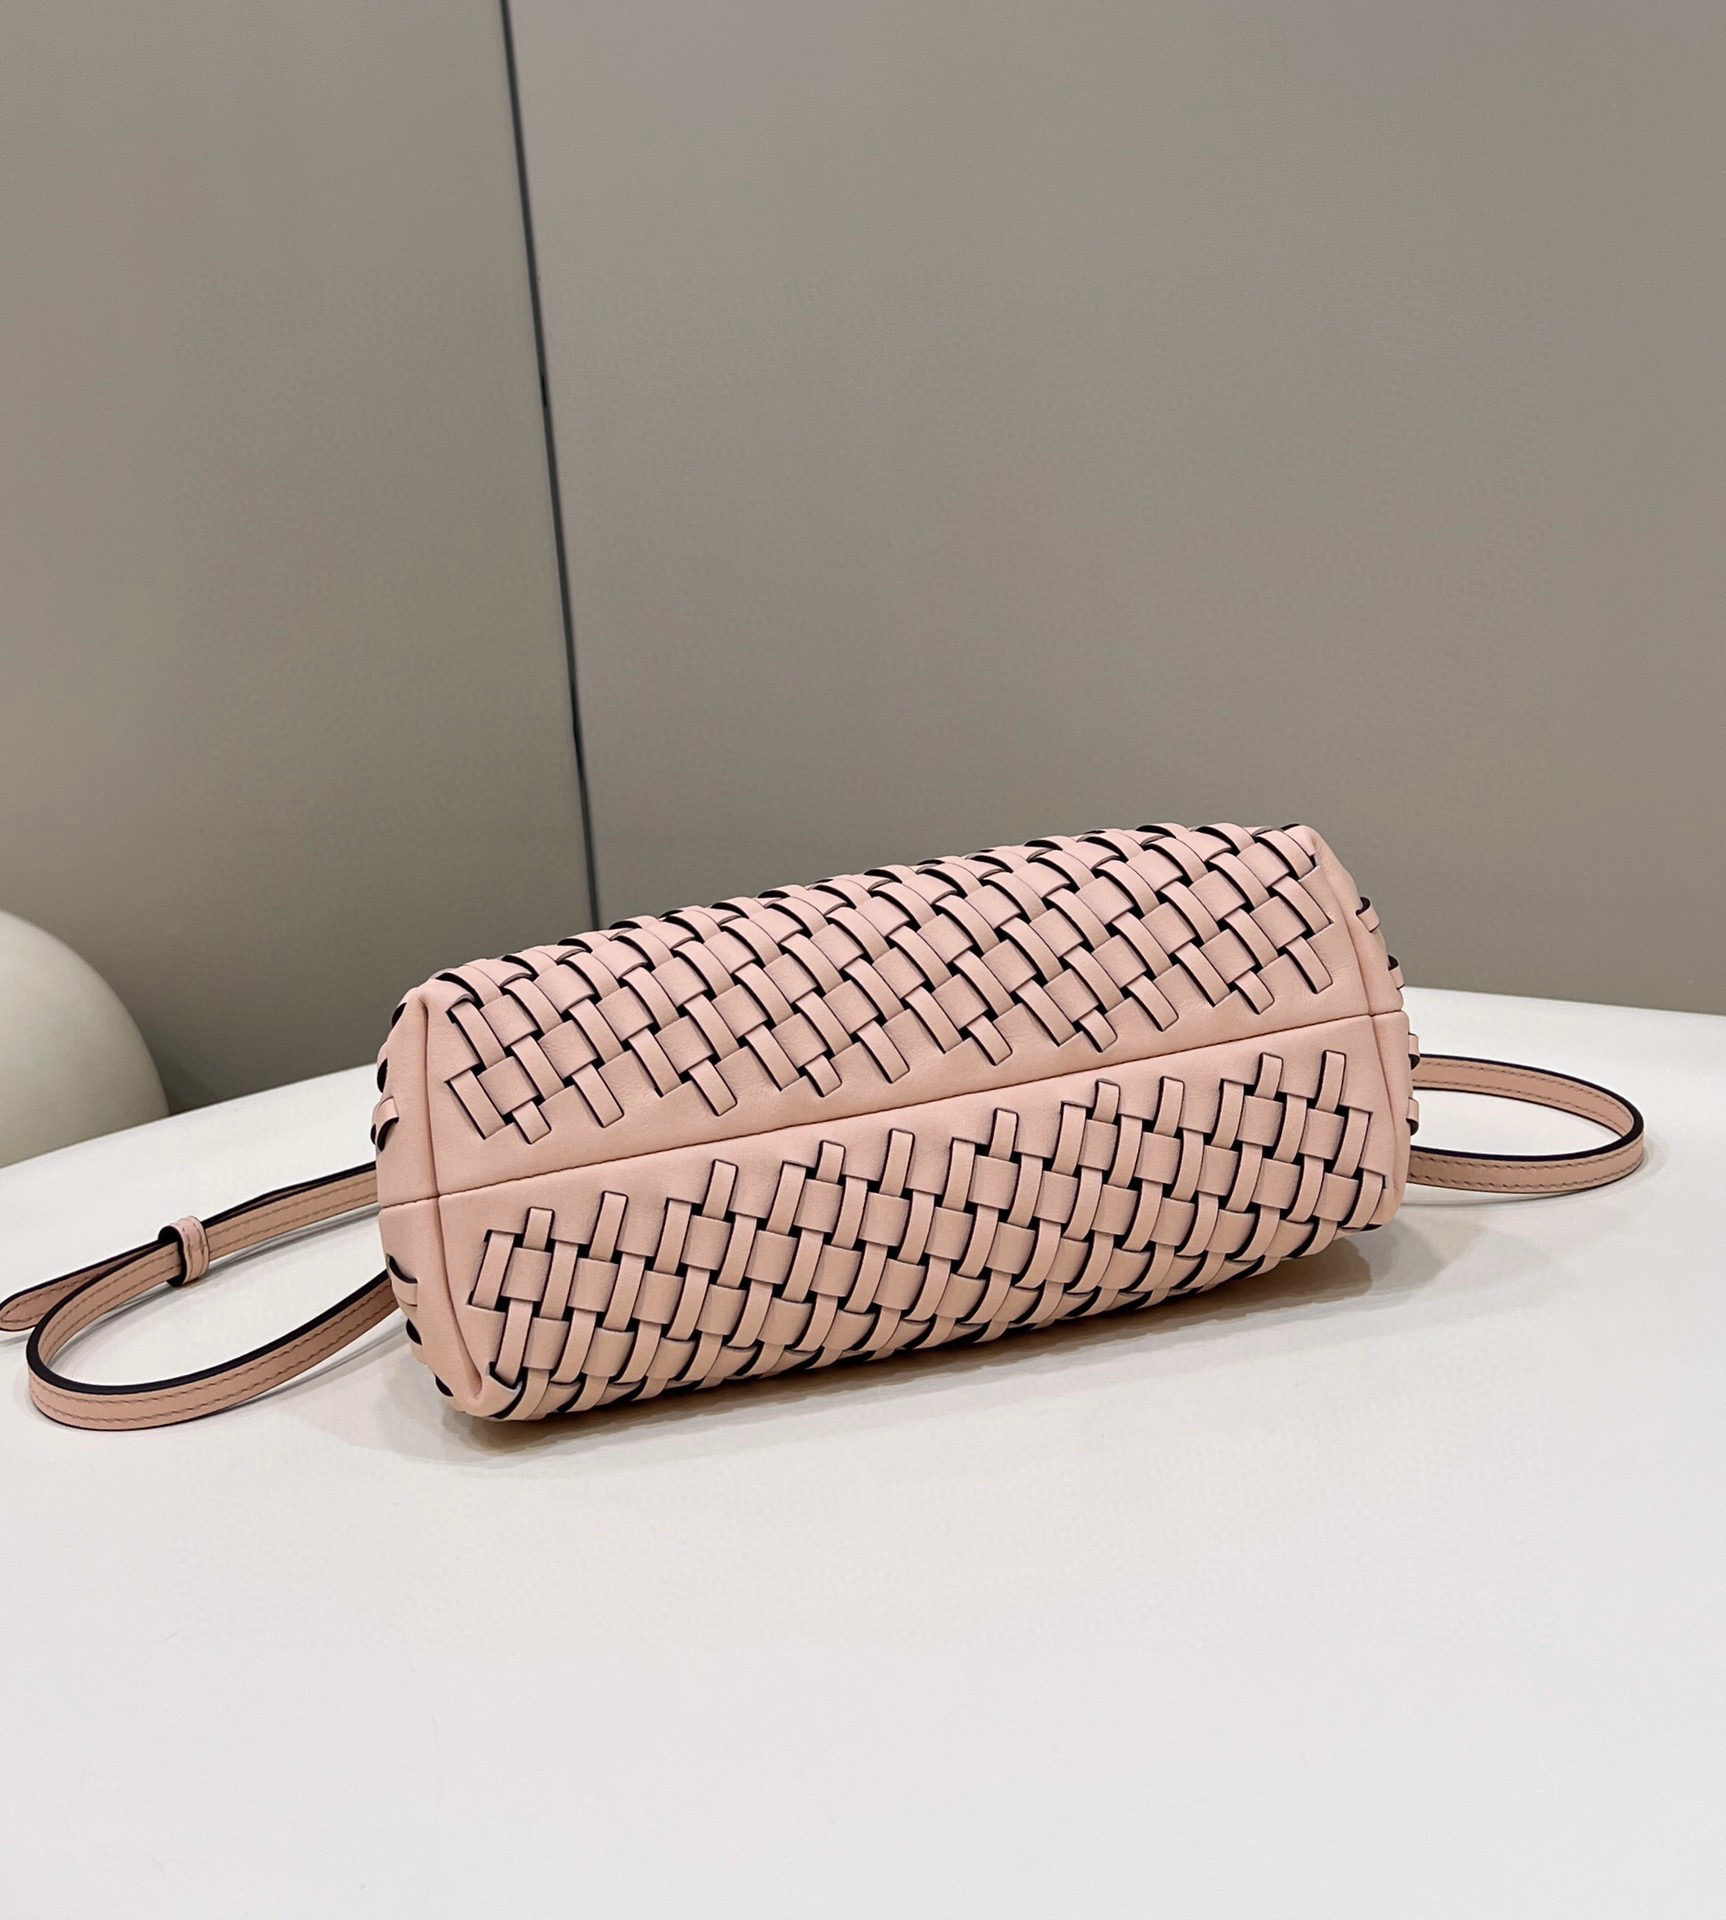 Fendi First Small braided leather bag Pink F80103